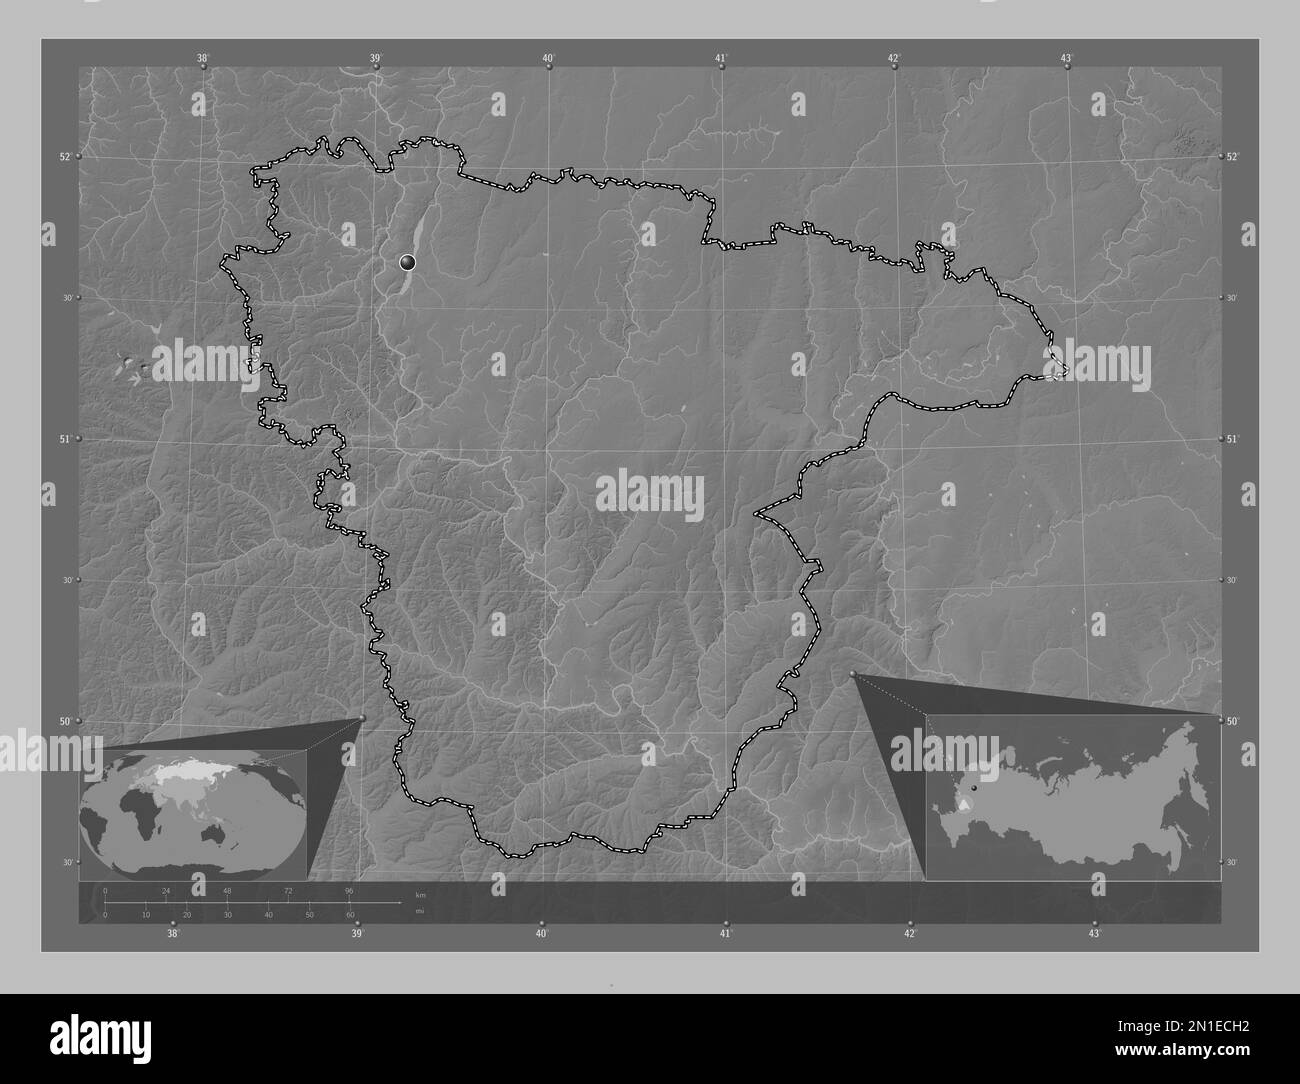 Voronezh, region of Russia. Grayscale elevation map with lakes and rivers. Corner auxiliary location maps Stock Photo